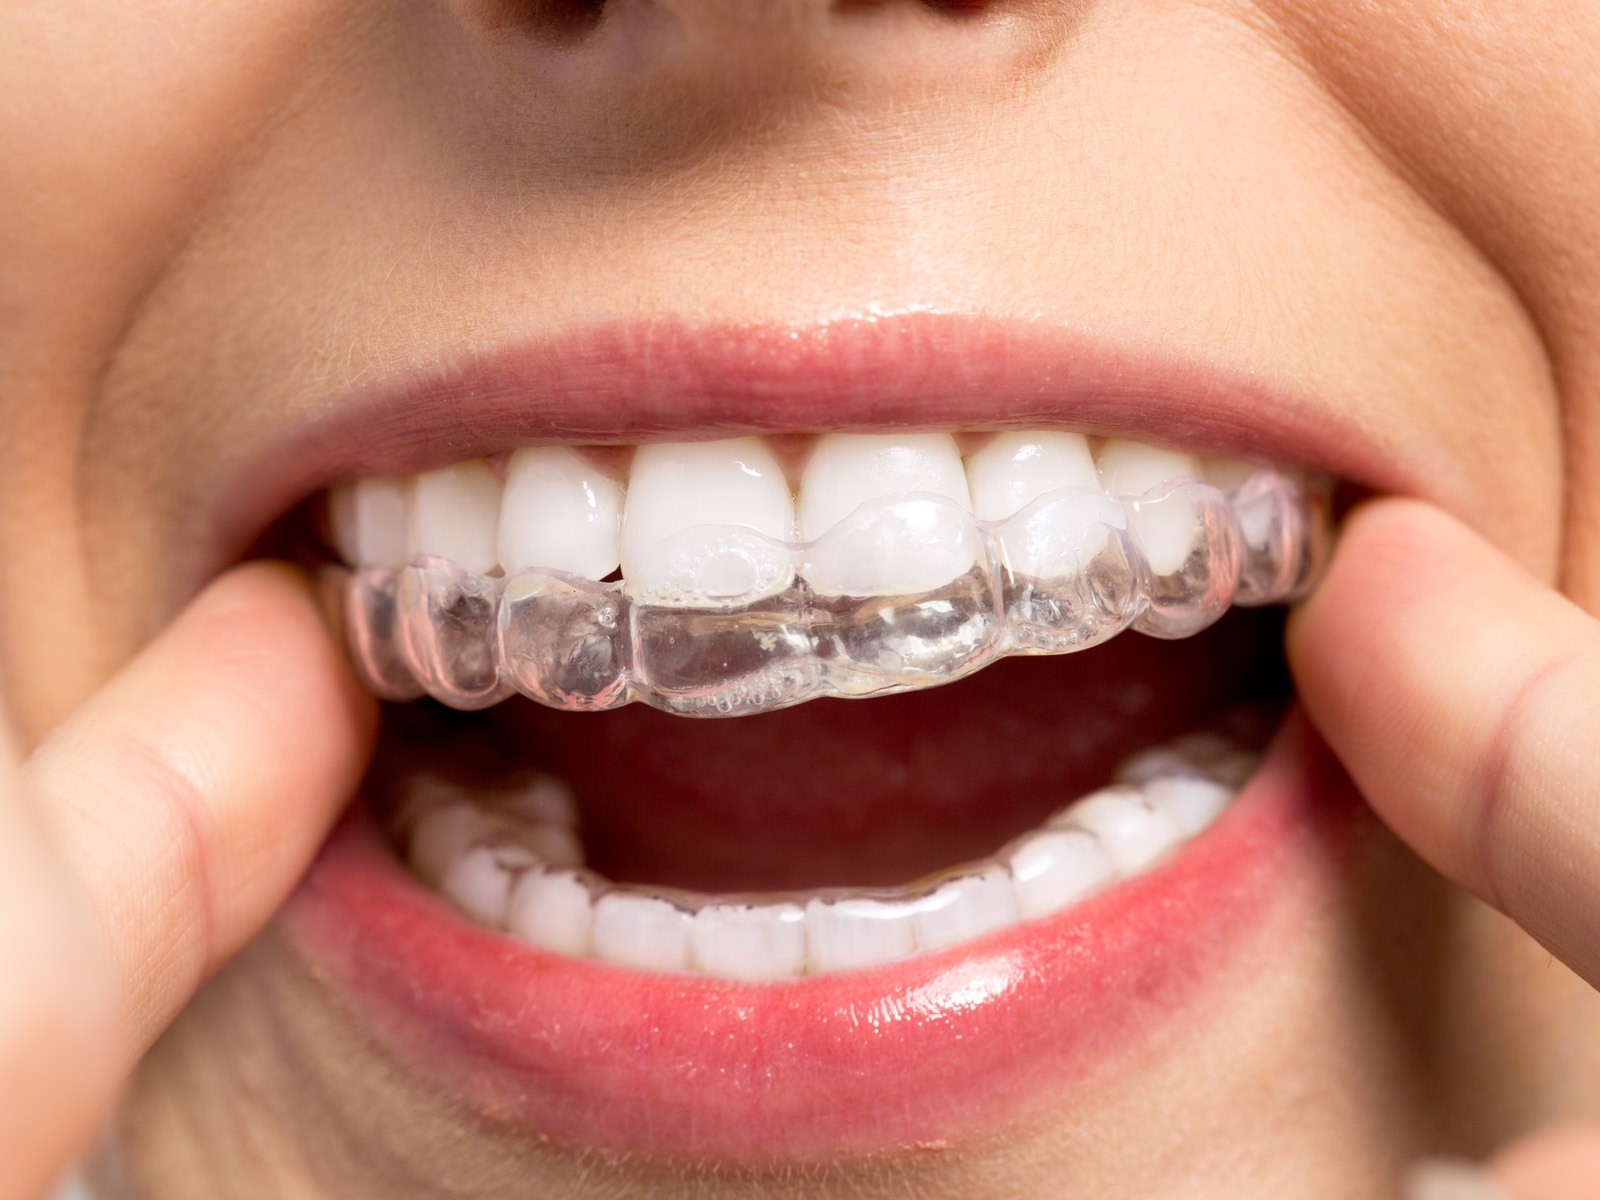 How long do your teeth hurt after getting Invisalign?